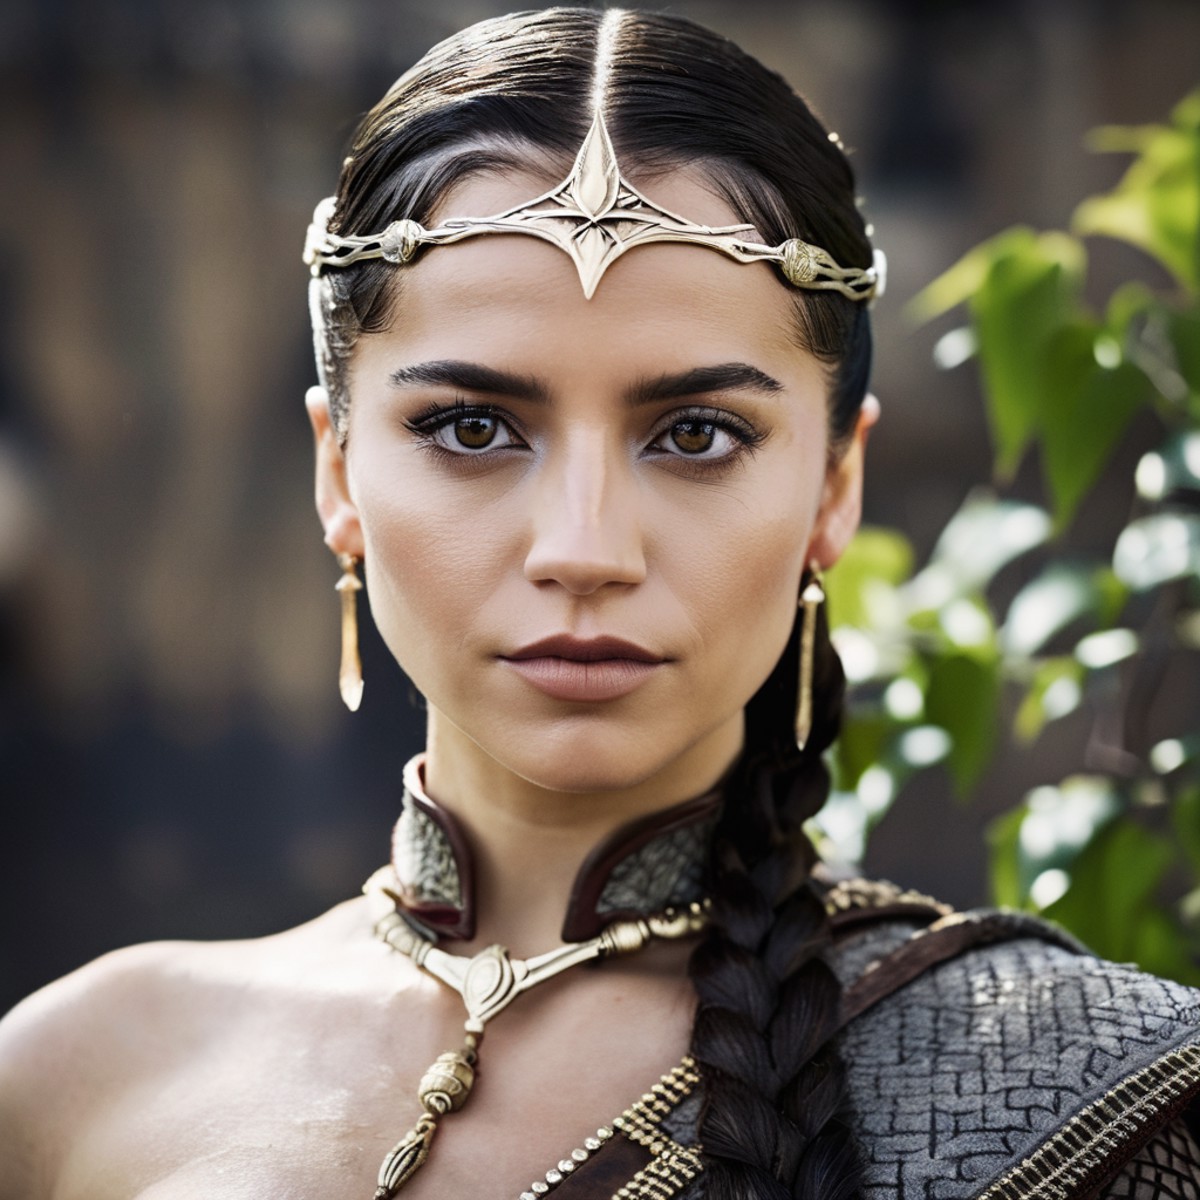 Skin texture, Closeup portrait photo of a stunning young woman dressed as a highborn noble from game of thrones,f /2.8, Ca...